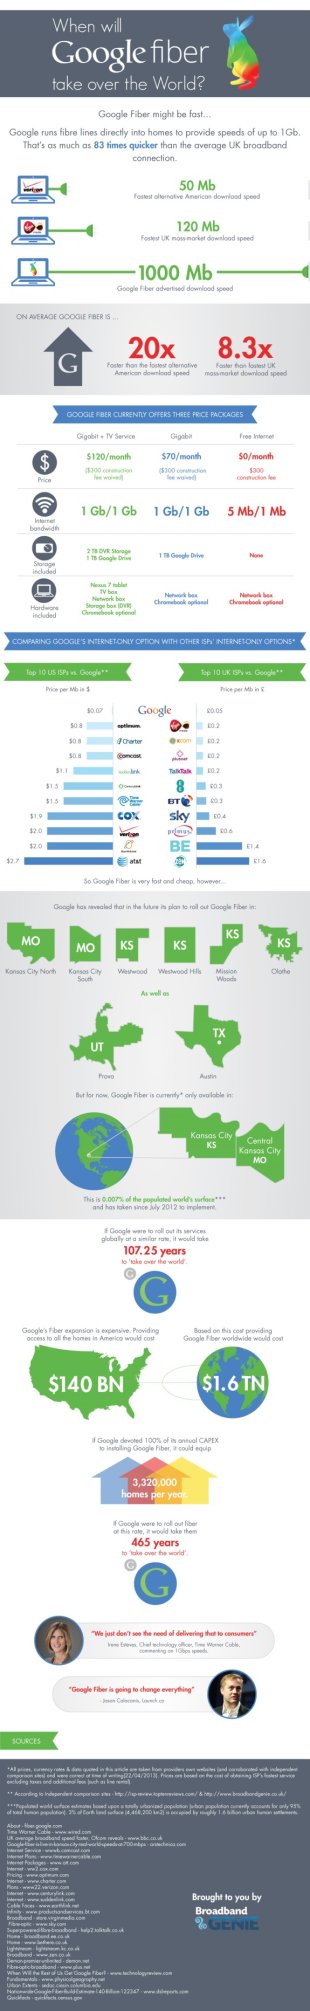 Google Fiber infographic: Will it Take Over the World? image google fibre infographic 5751